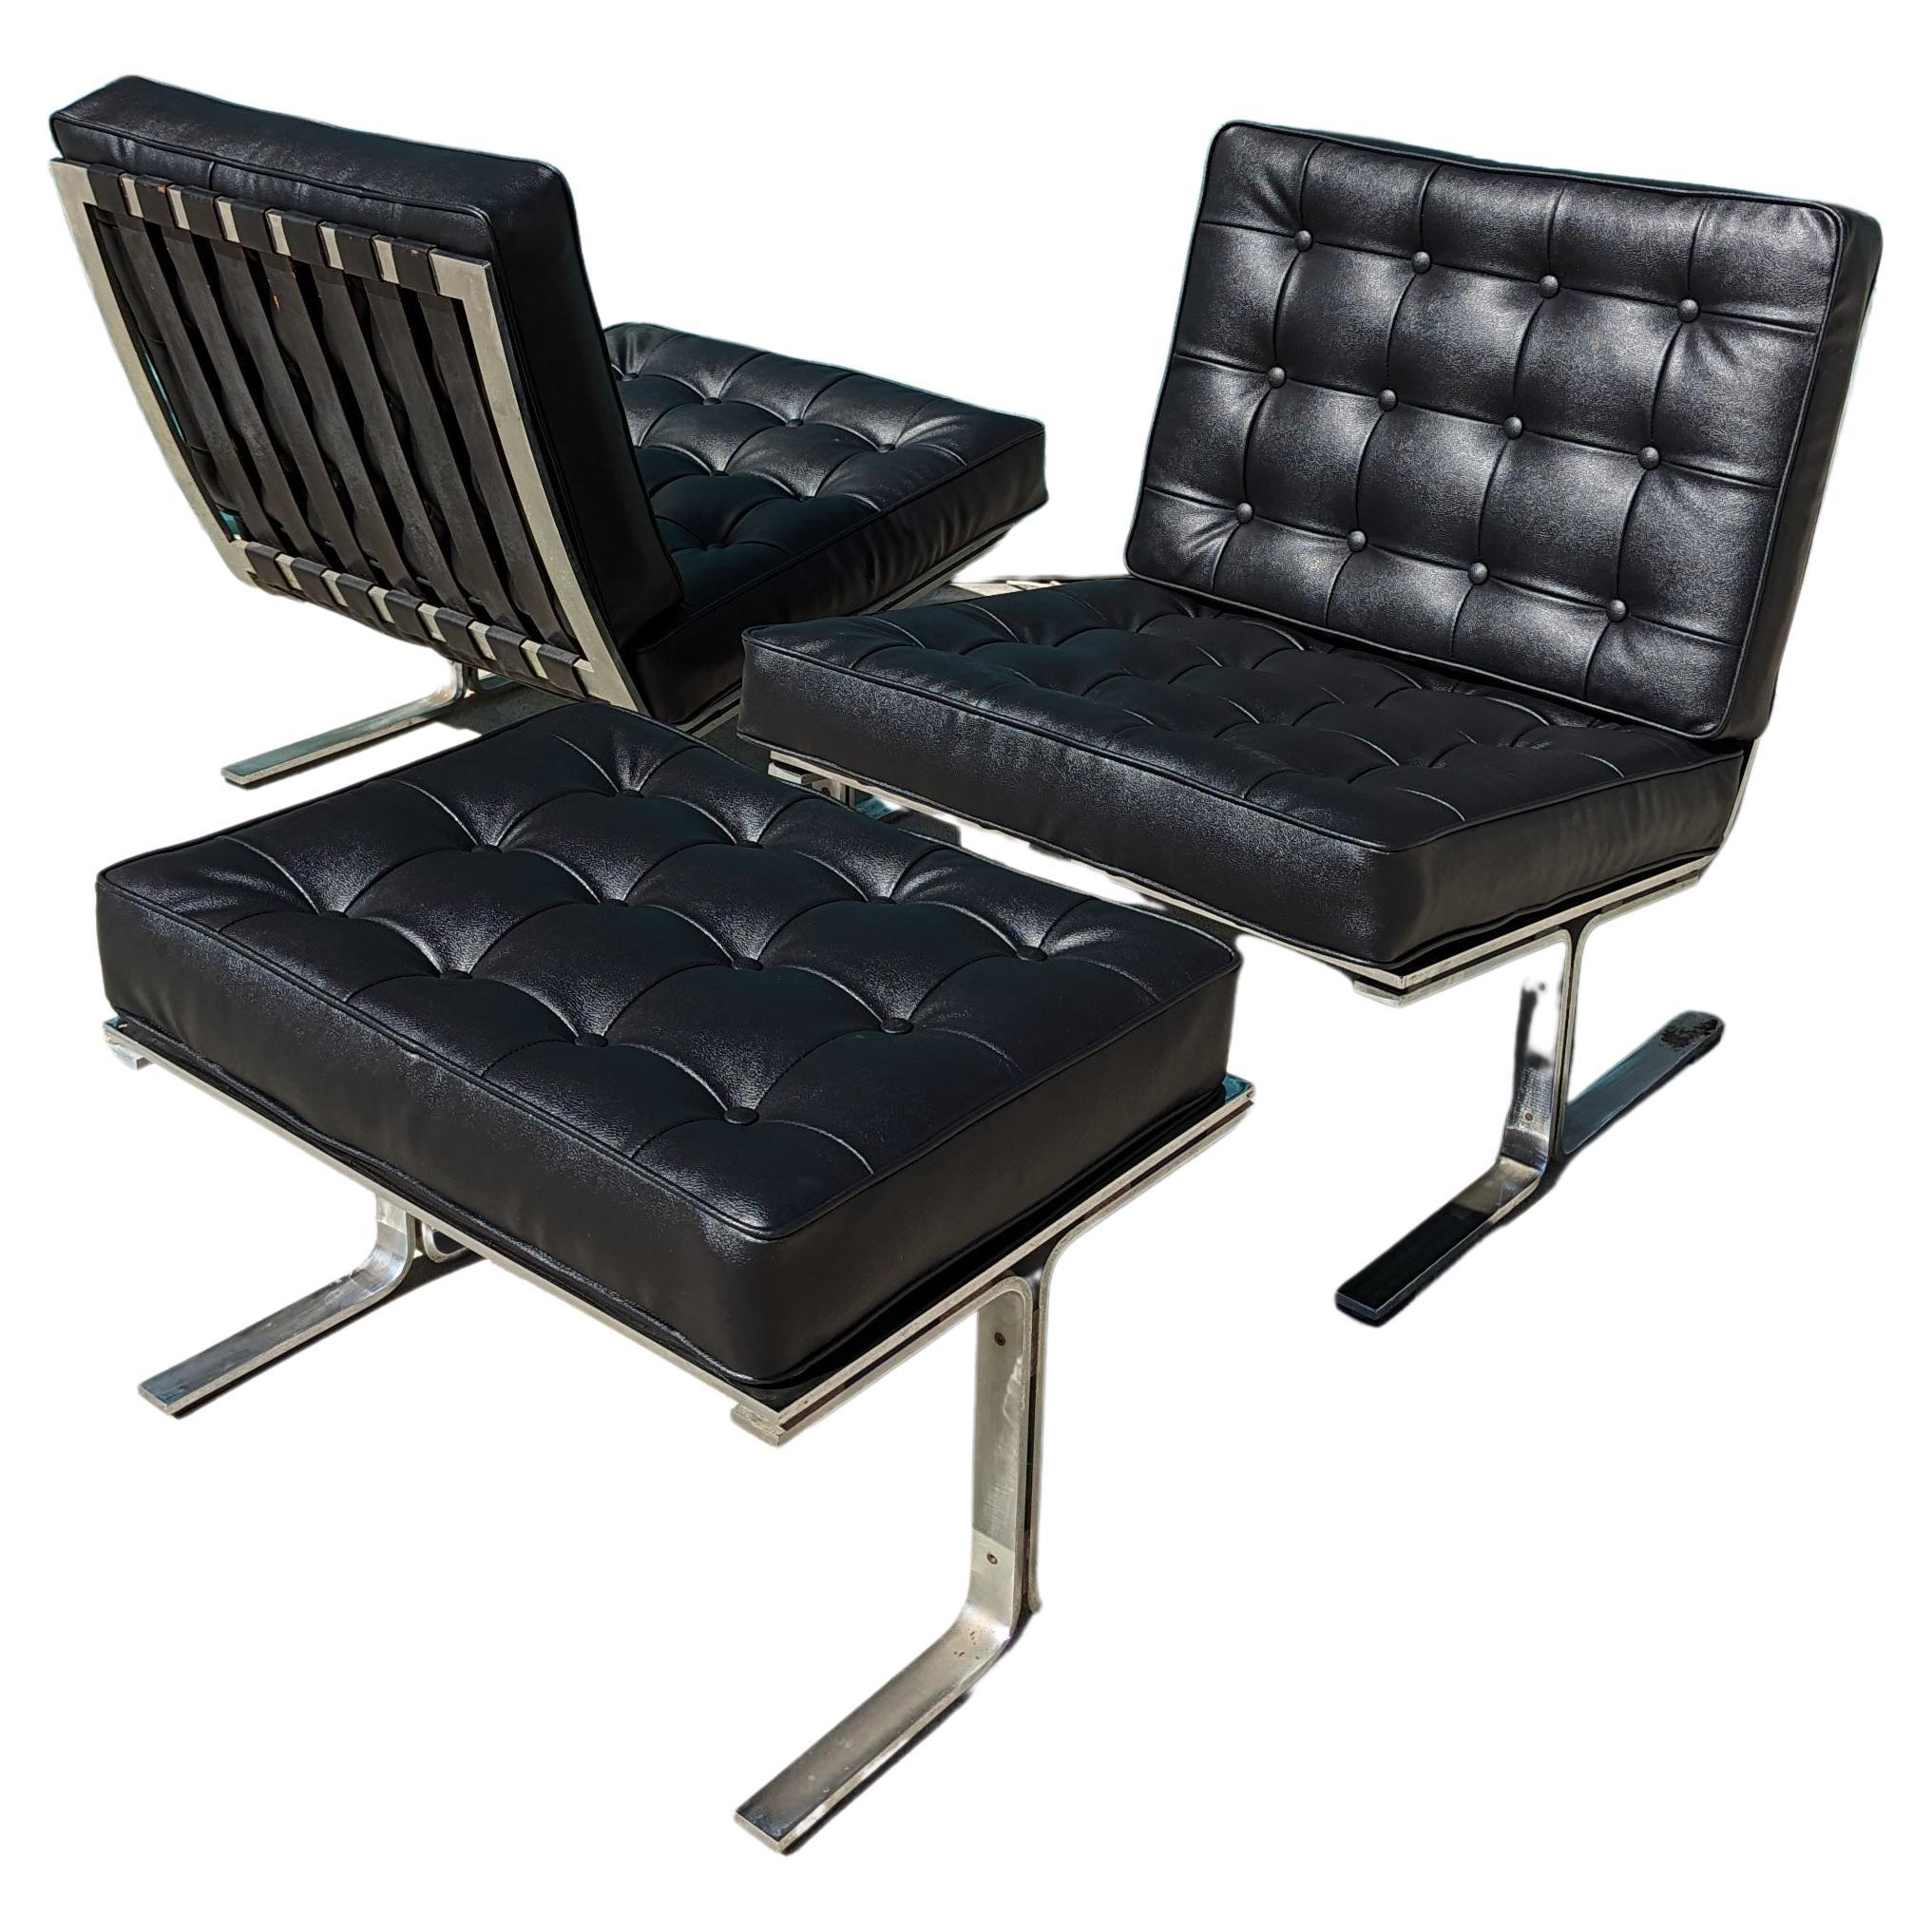 Solid Chrome F60 "Easy" Lounge Chairs by Karl-Erik Ekselius for J. O. Carlsson For Sale